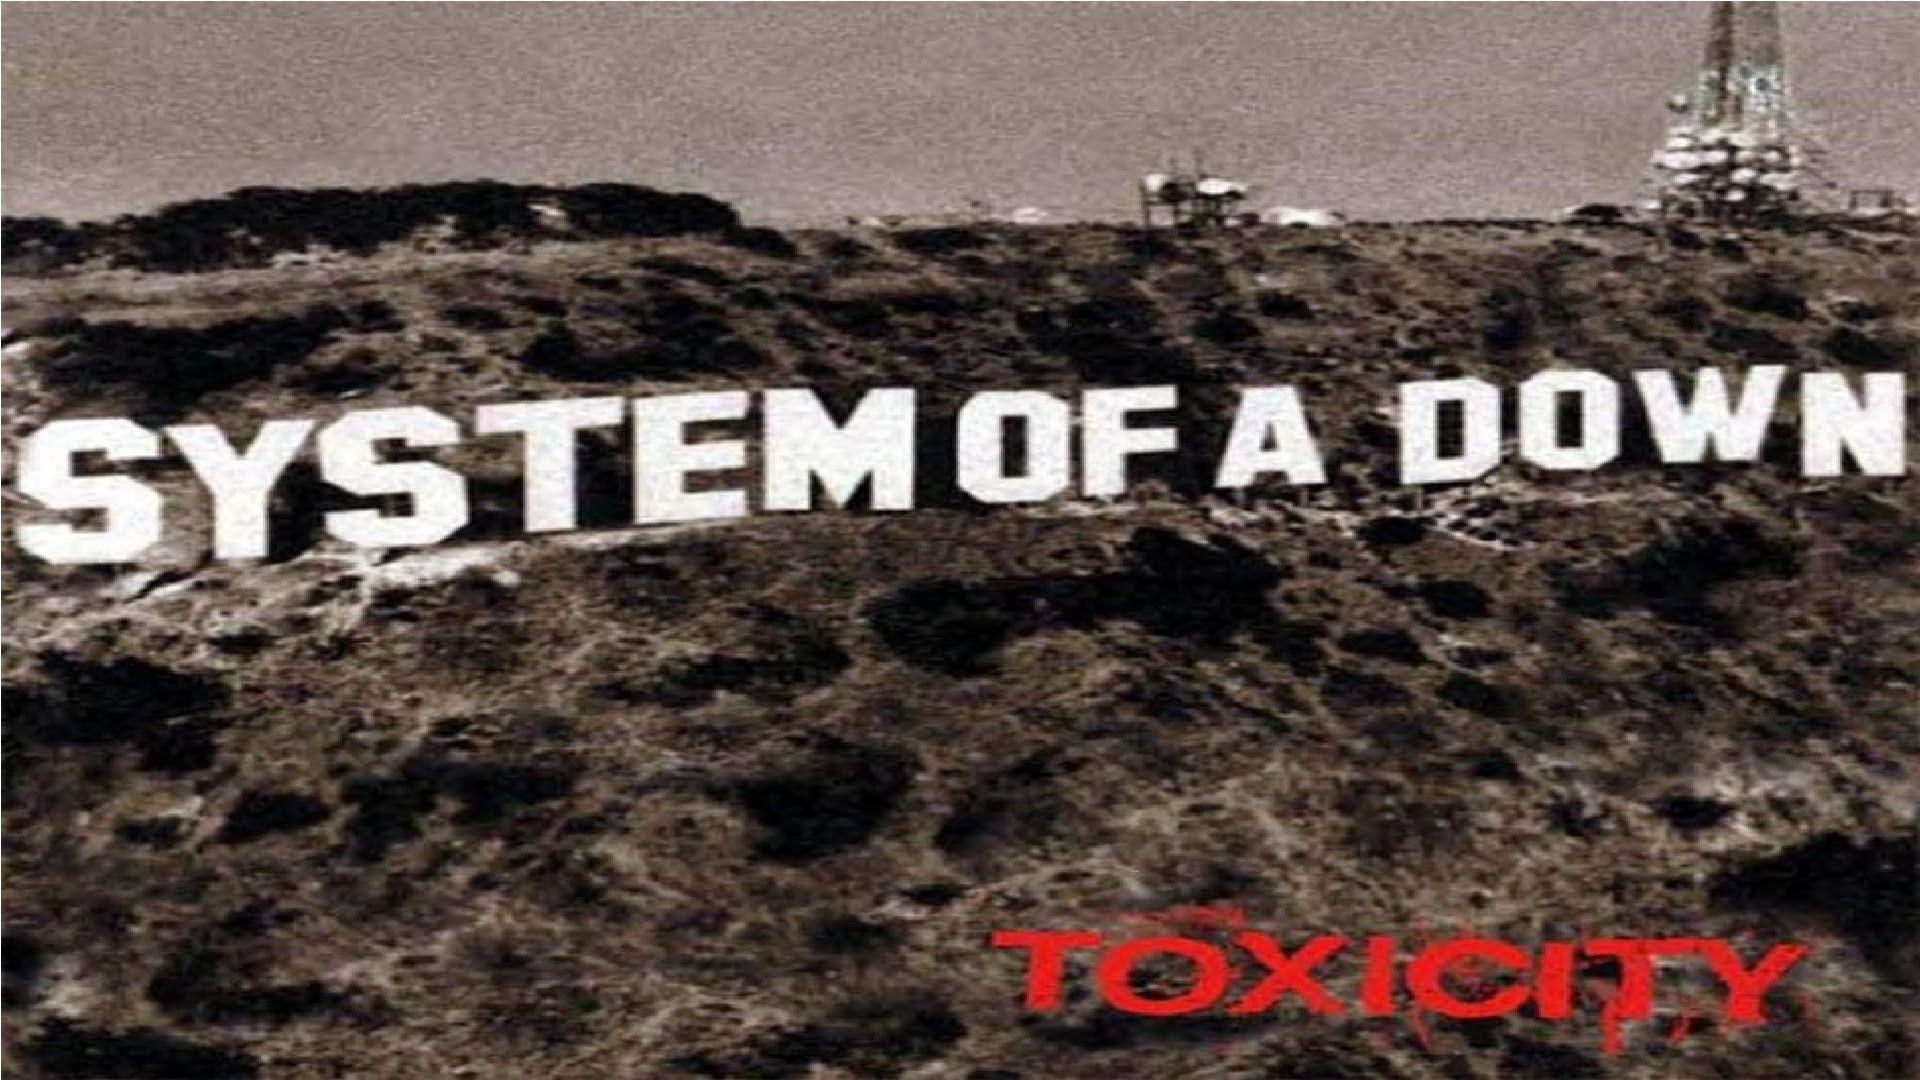 System of a down toxicity текст. System of a down Toxicity обложка. System of a down Wallpaper. Toxicity текст. Токсисити слушать.